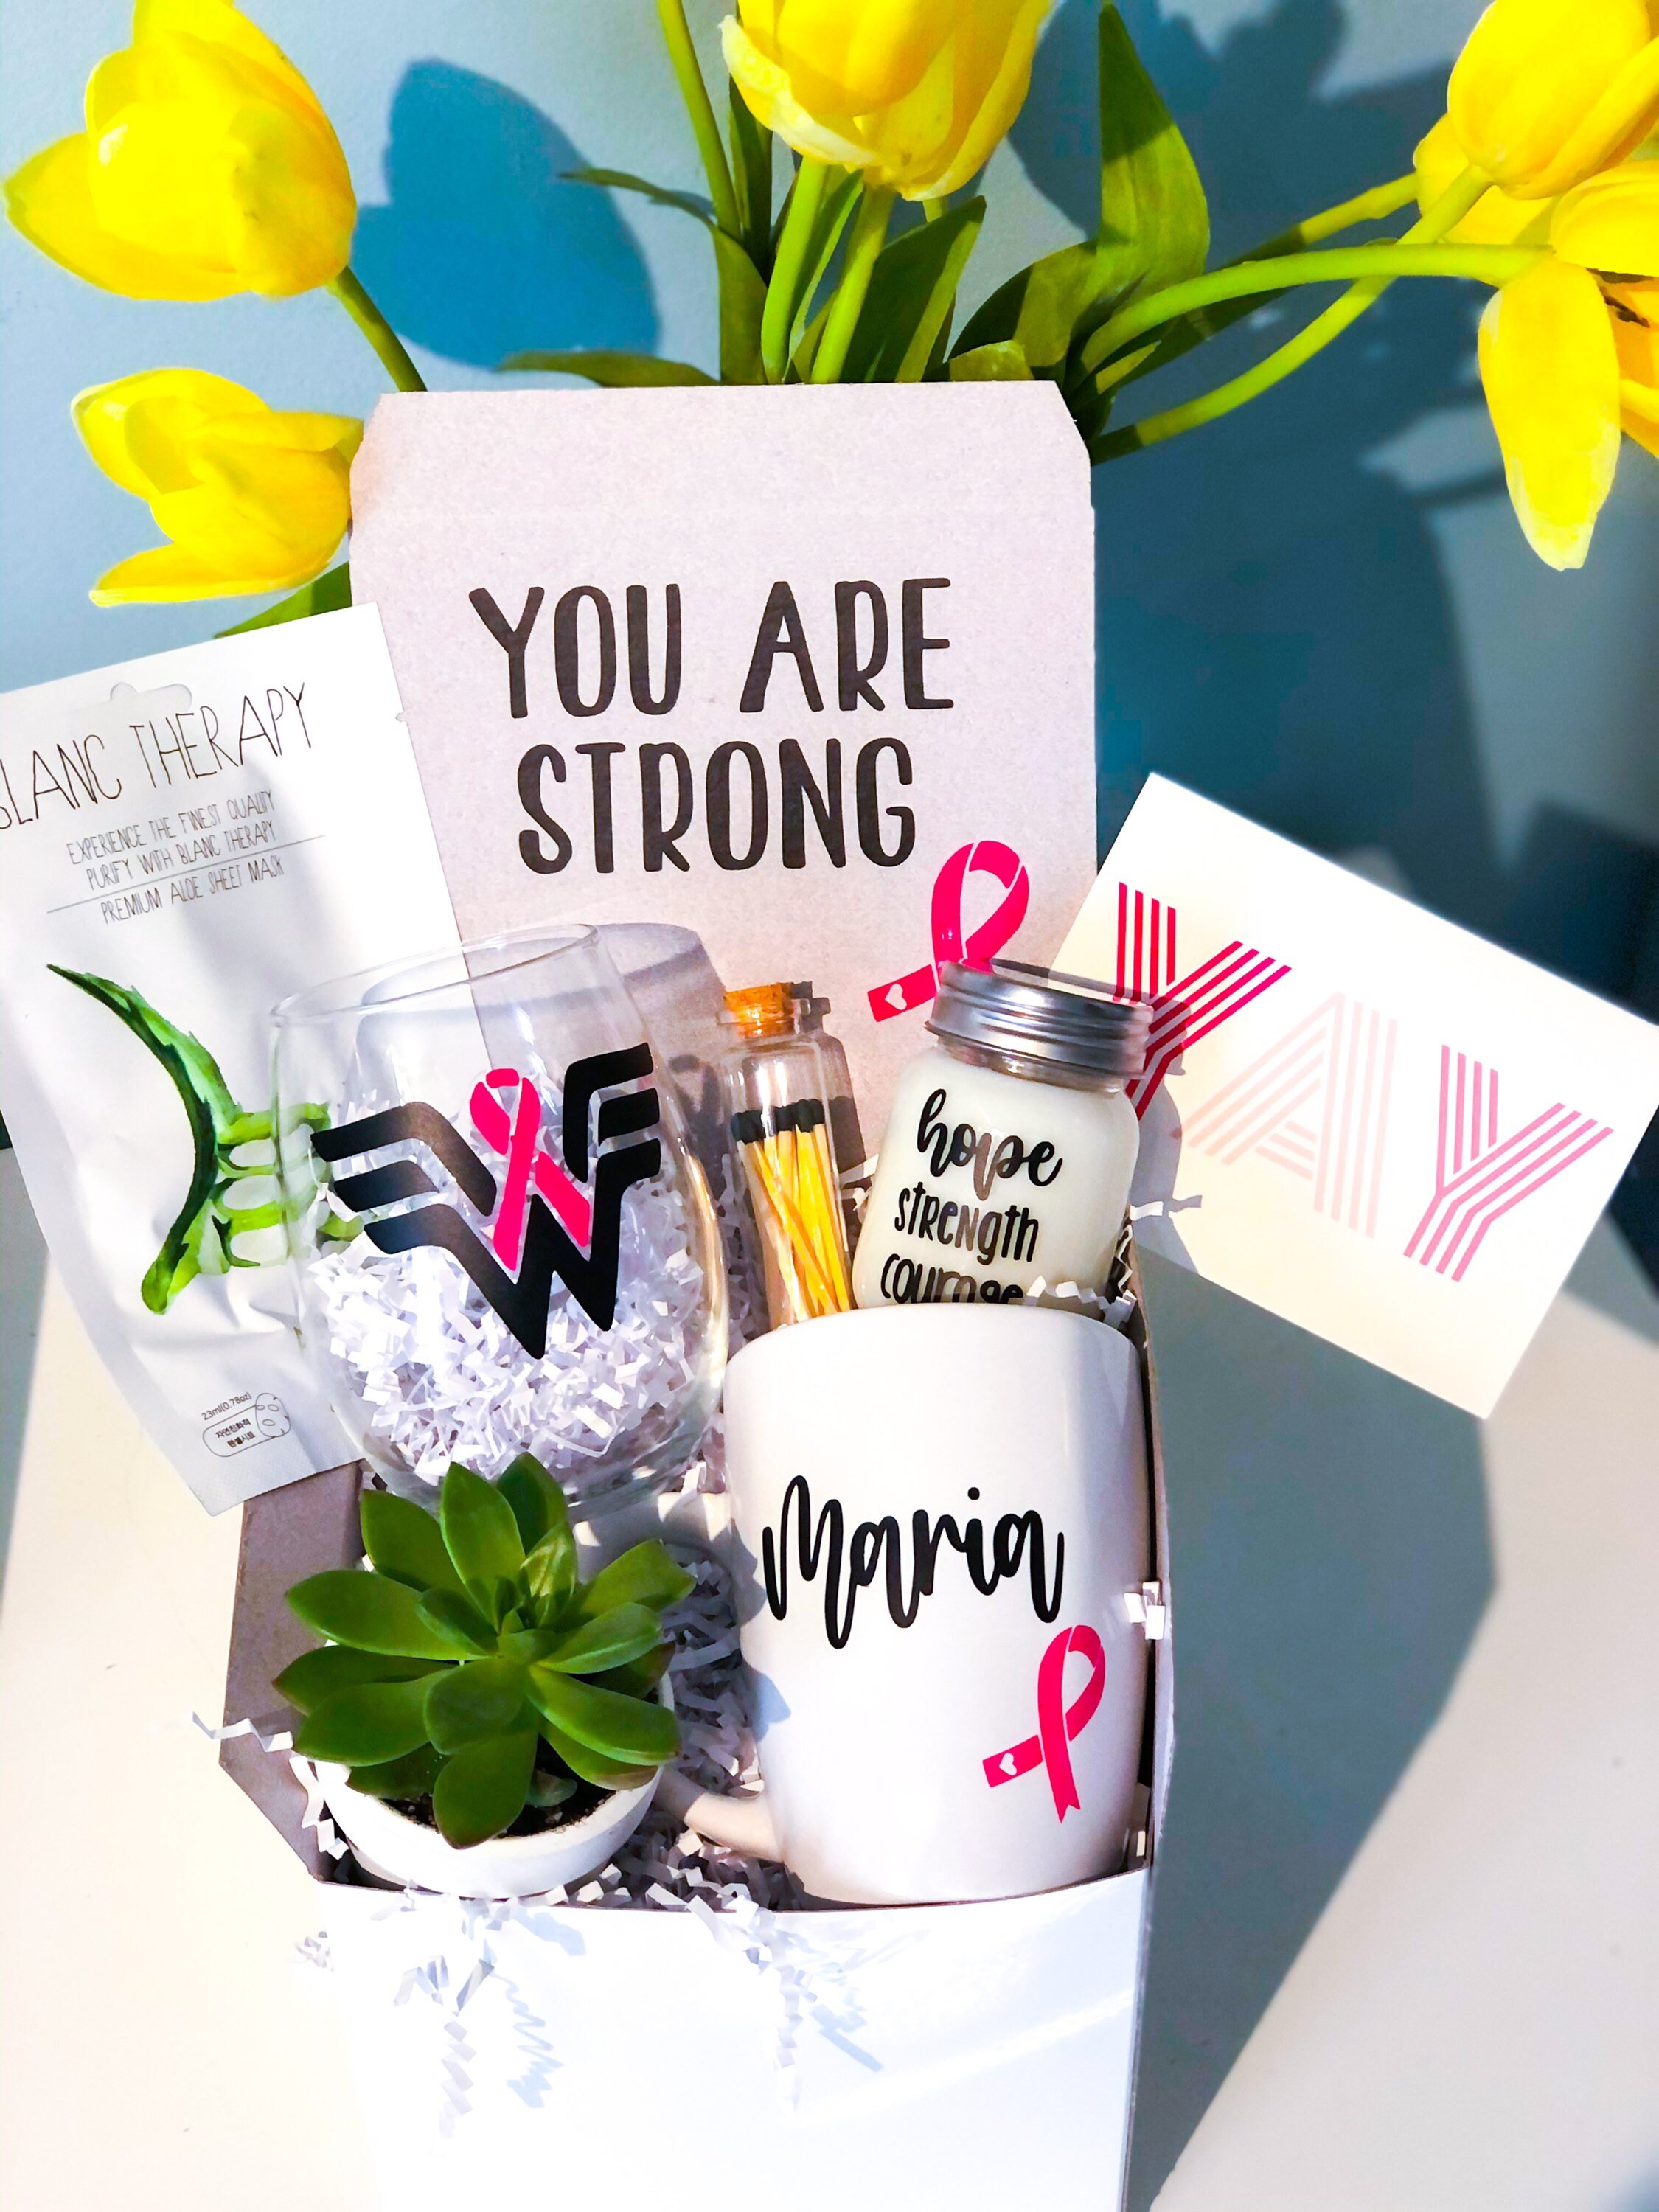 Show You Care-Be Aware Breast Cancer Gift tote - spa baskets for women gift  - cancer gift, One Basket - Kroger